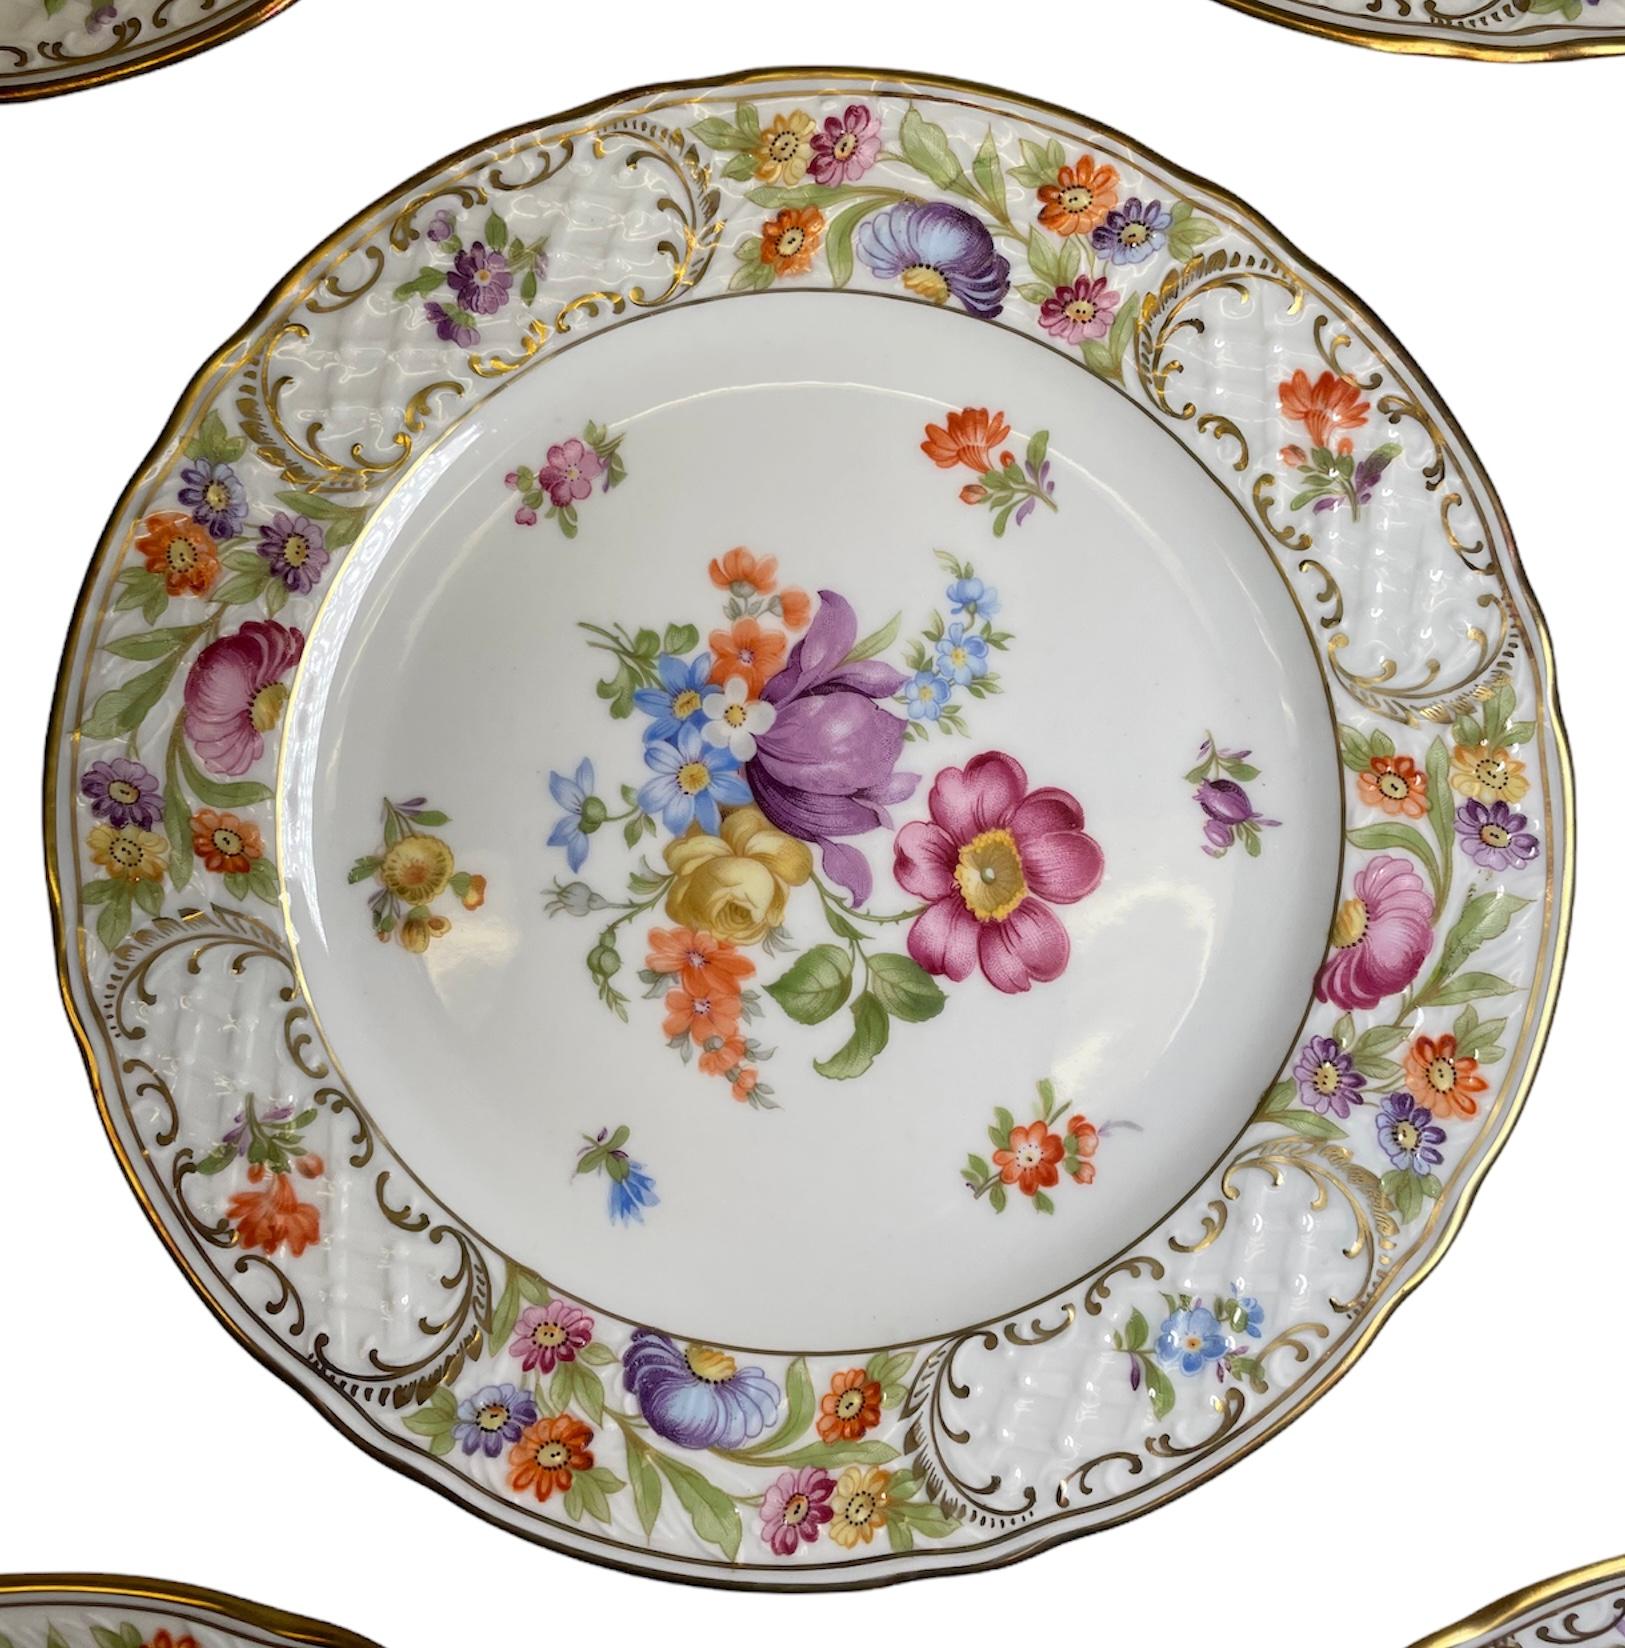 This is a set of eight Schumann porcelain salad plates. They depict a white background with a hand painted bouquet of flowers in the center. Also the trellis porcelain rim is adorned with bouquets of flowers alternated with single branches of